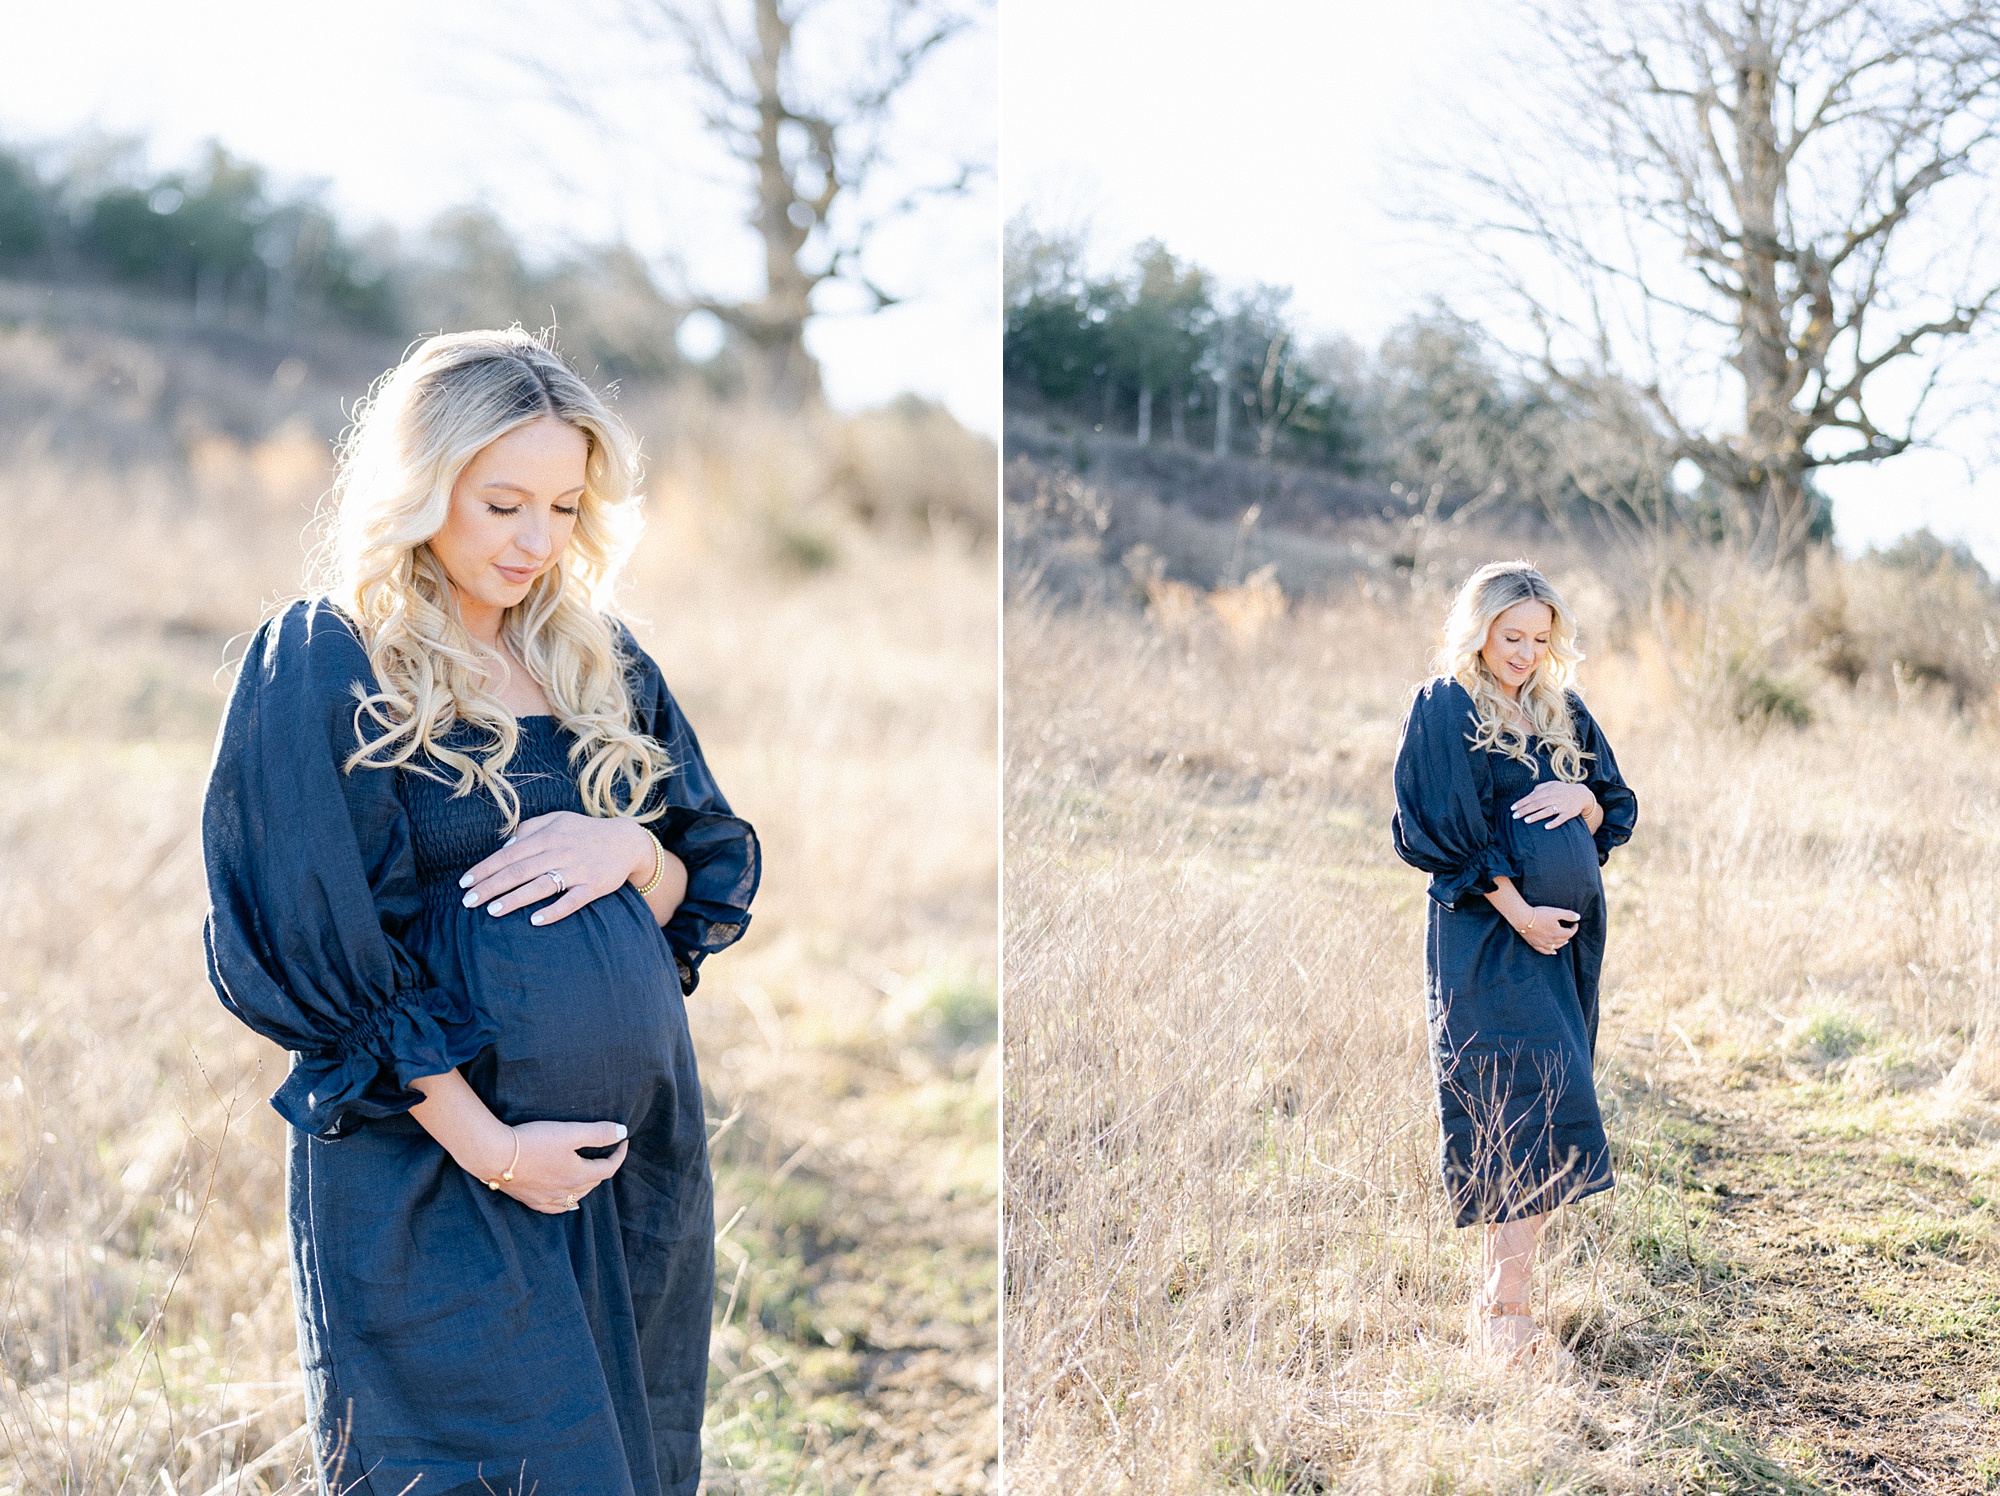 Brentwood TN Maternity Photographer captures outdoor maternity portraits